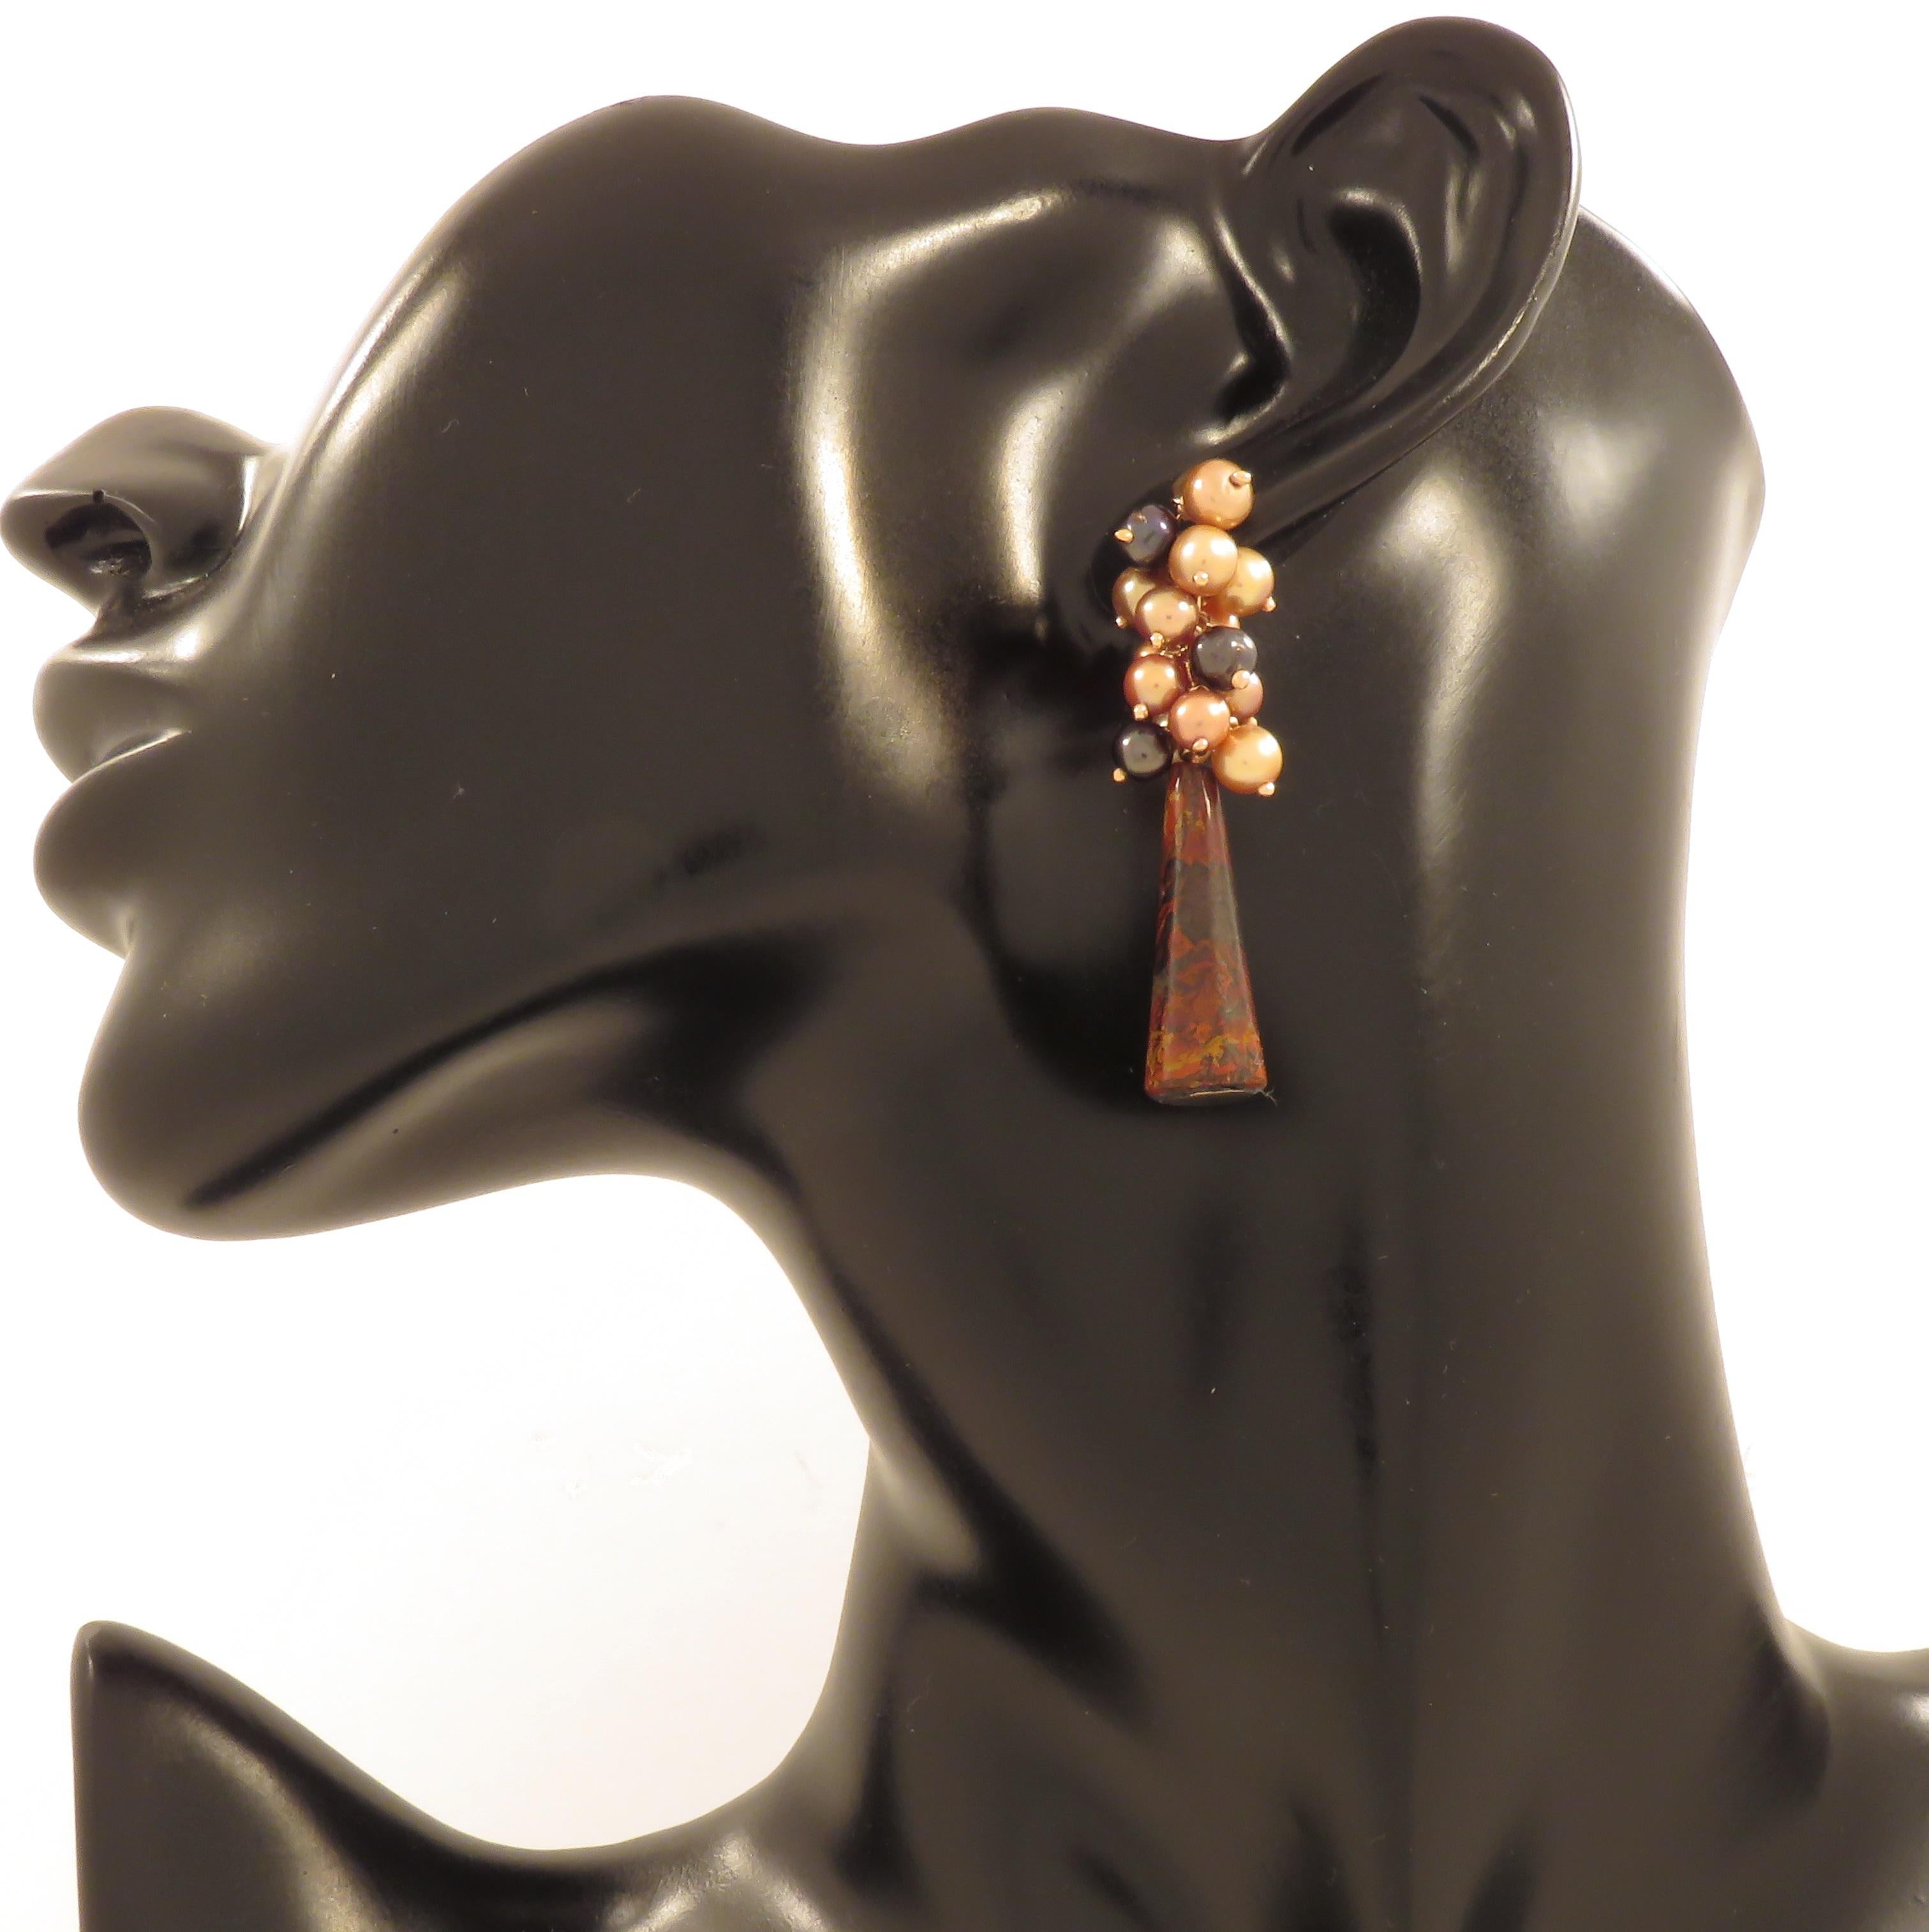 Lovely dangle earrings featuring brown agate drops and freshwater pearls. They are held by square front studs and completely crafted in 9 karat rose gold. The length of each earring is 50 mm / 1.968 inches. Marked with the Italian gold mark 375 and